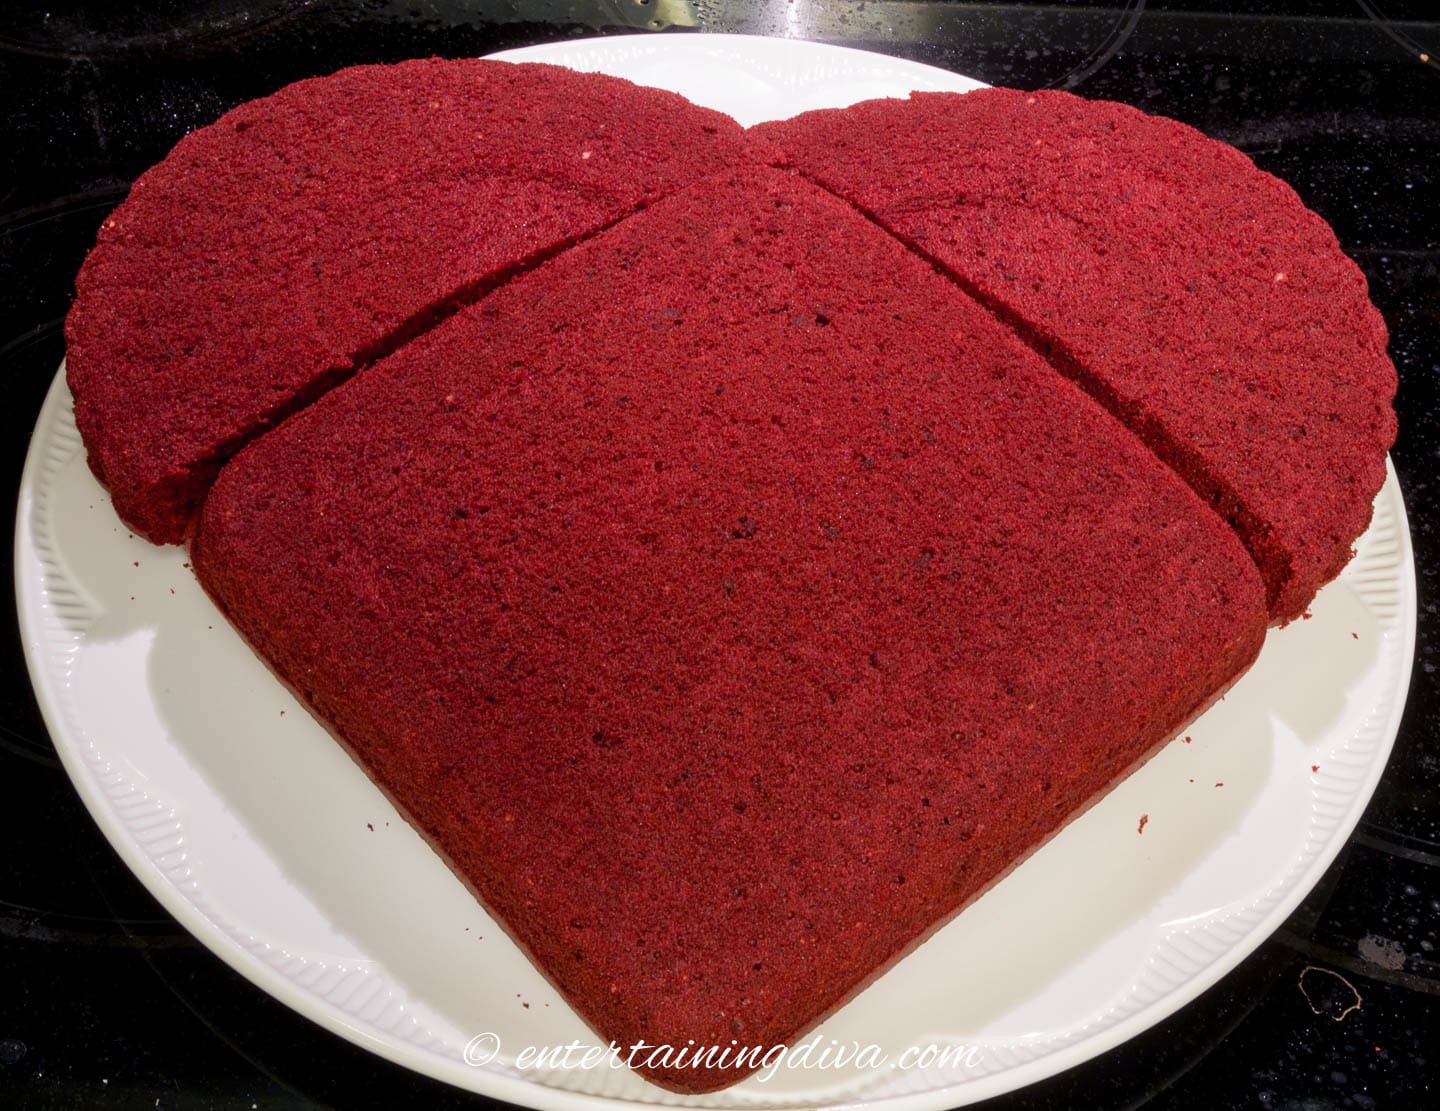 heart shaped cake made from two halves of a round cake pushed up against the flat sides of a square cake